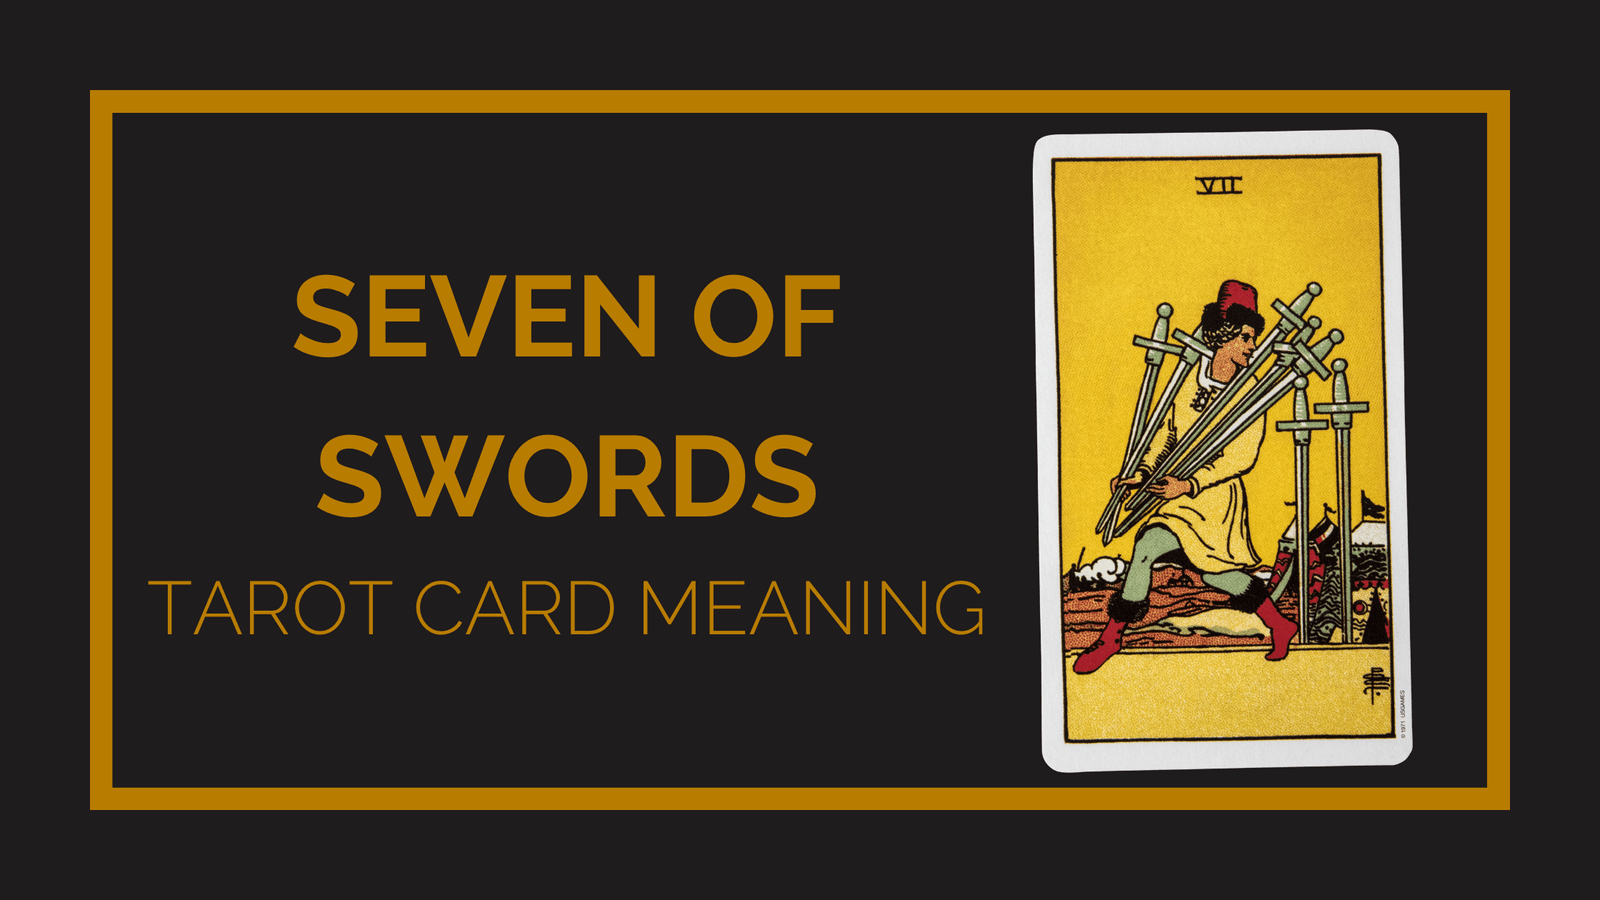 Seven of swords tarot card meaning | tarot with gord